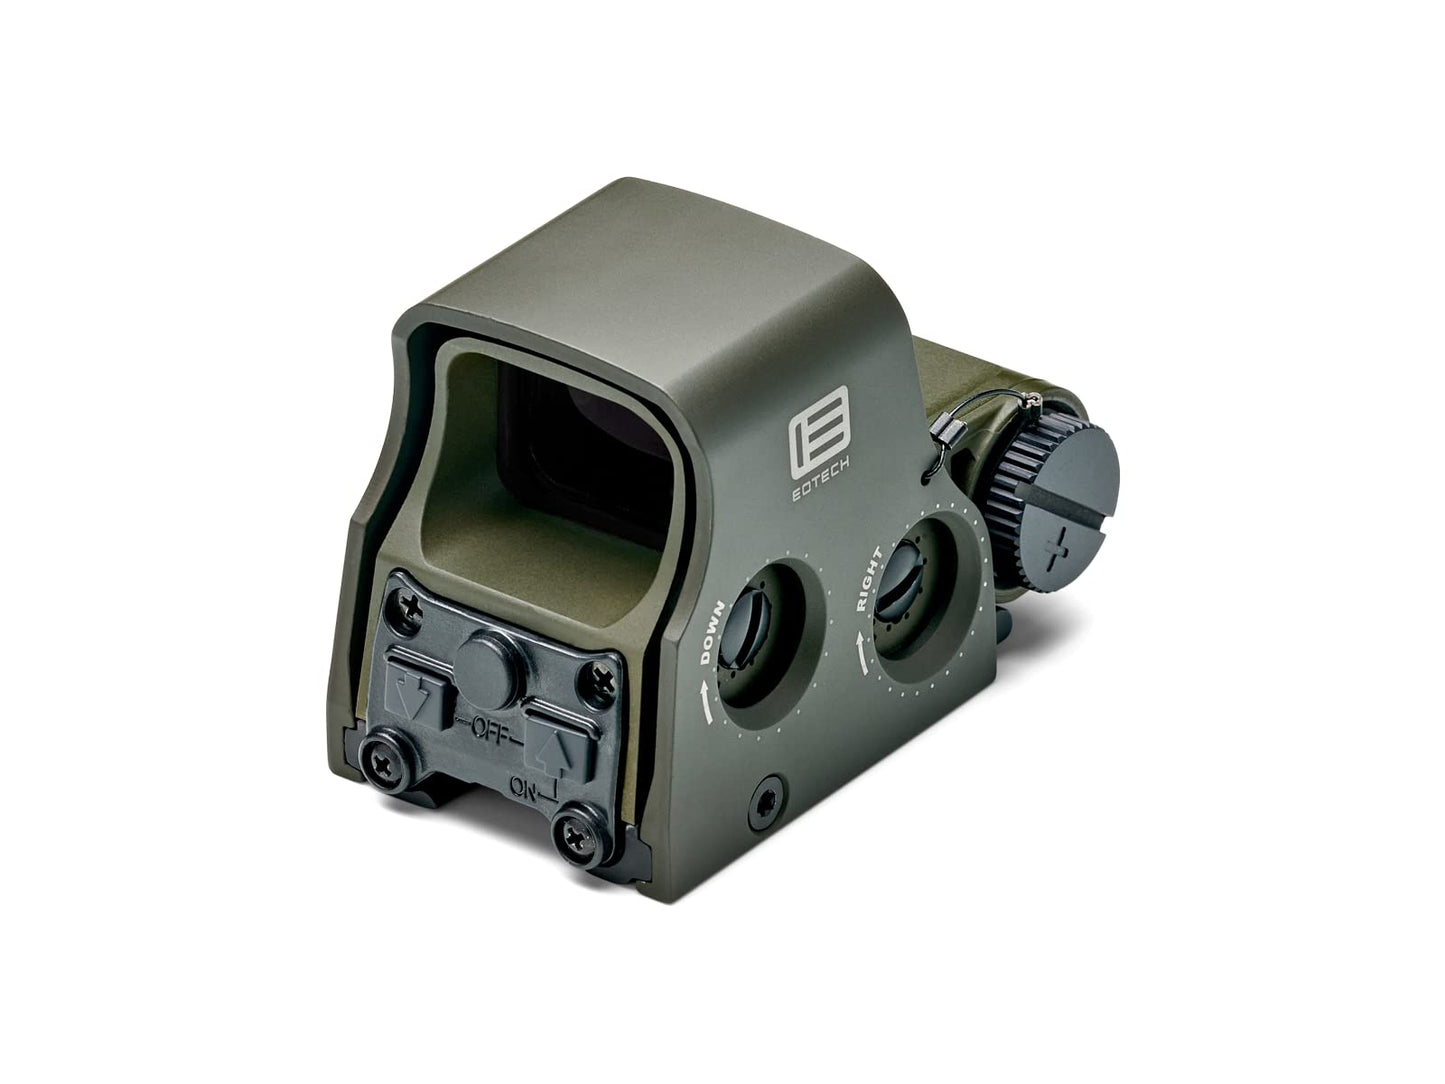 EOTECH XPS2-0 Holographic Sight Green Reticle; Single CR123 battery;reticle pattern with 68 MOA ring and 1 MOA dot - side buttons-single QD lever - XPS2-0 ODGRN